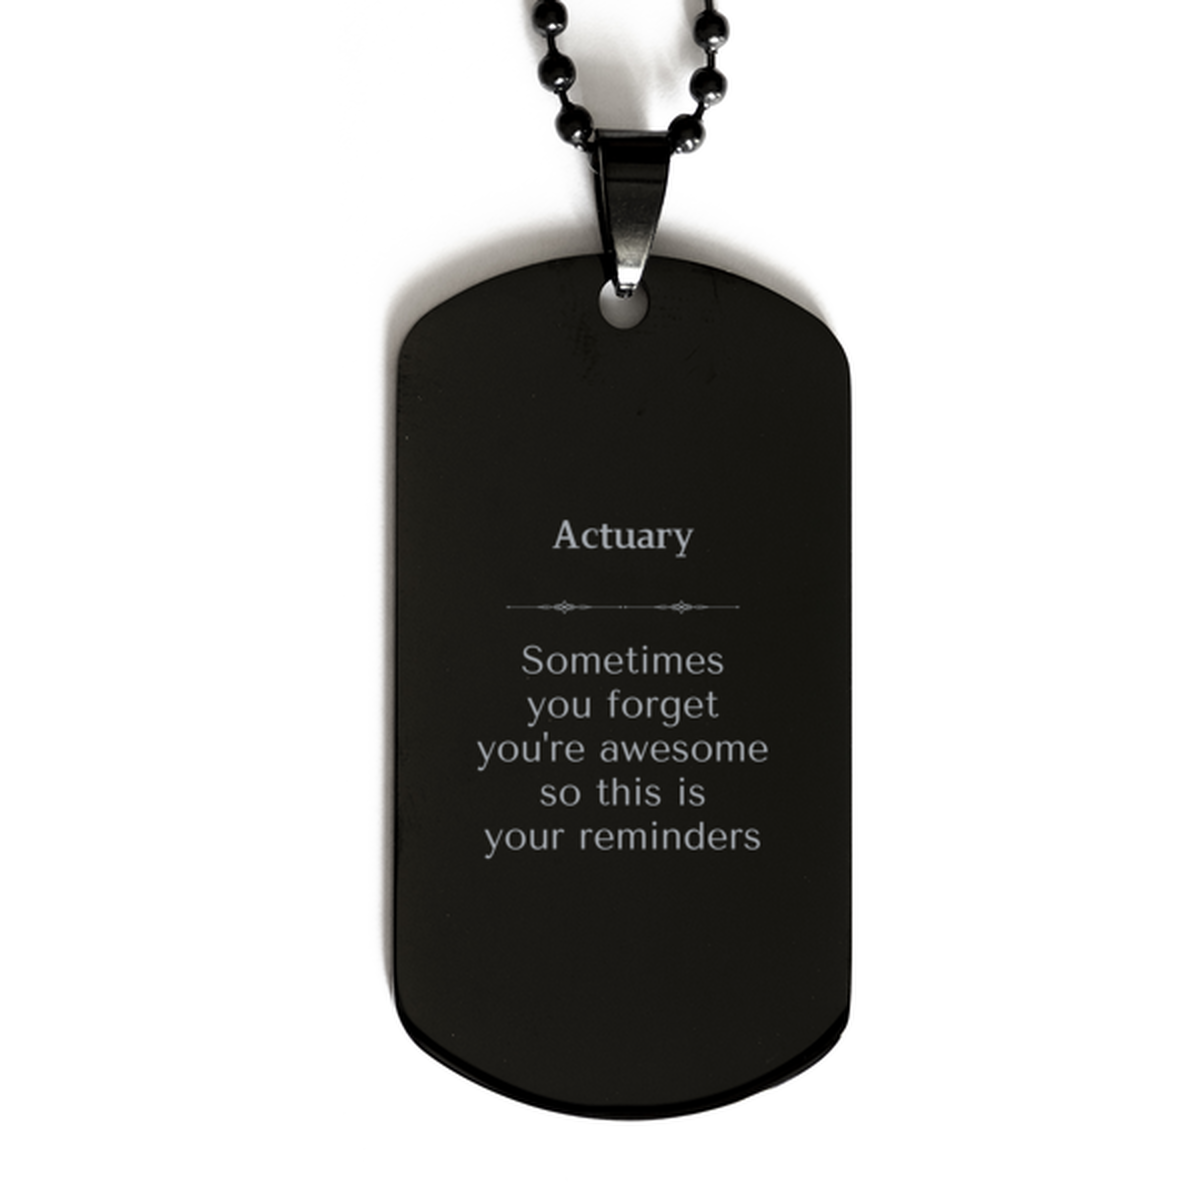 Sentimental Actuary Black Dog Tag, Actuary Sometimes you forget you're awesome so this is your reminders, Graduation Christmas Birthday Gifts for Actuary, Men, Women, Coworkers